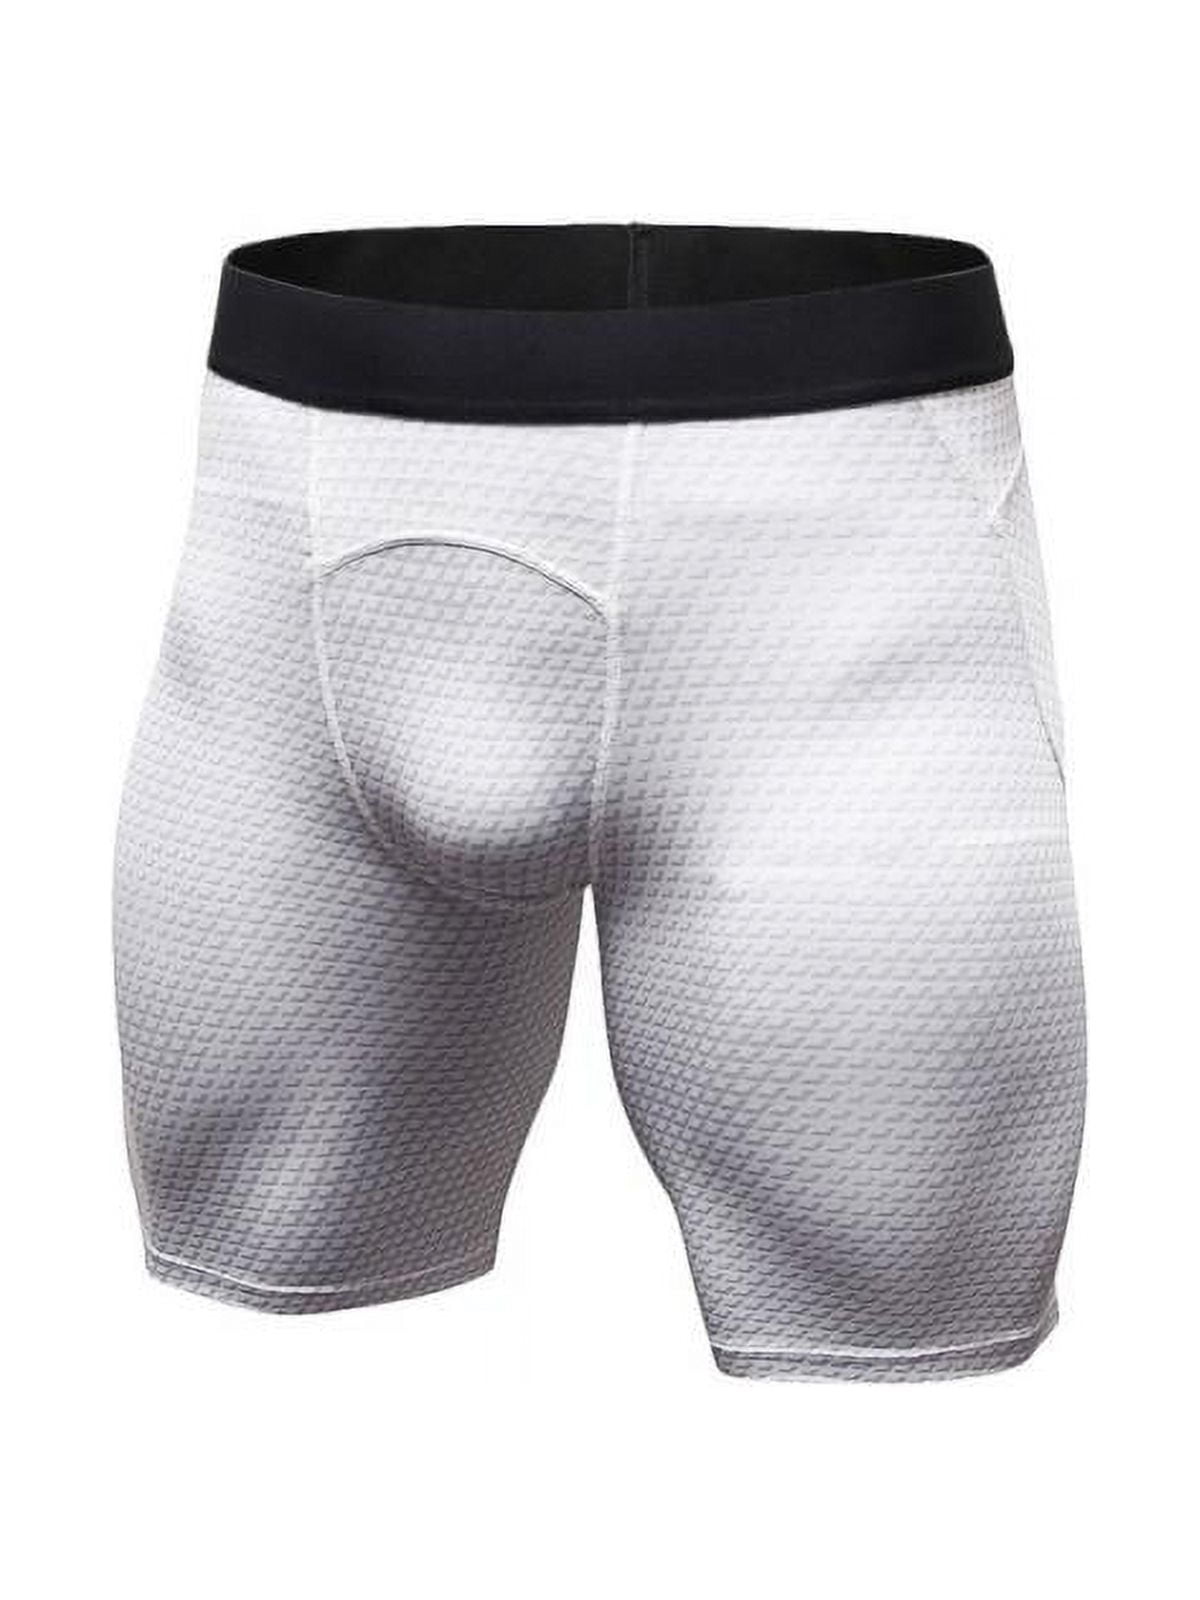 Mens Compression Shorts Sports Briefs Skin Tight Fit Gym Pants Base Layers  